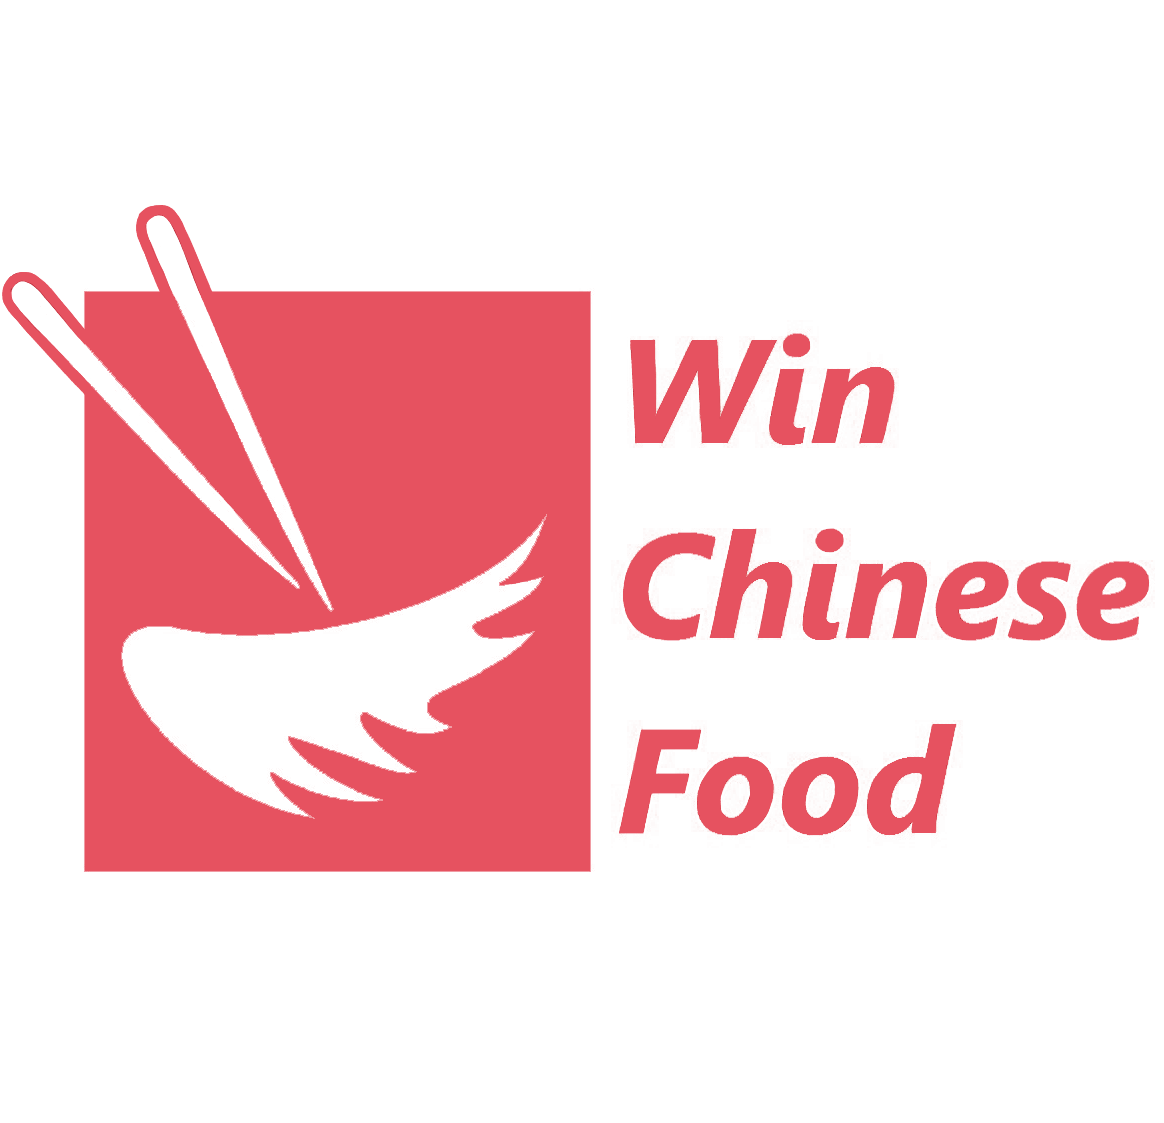 Win Chinese Food – We use 100% Vegetable Oil